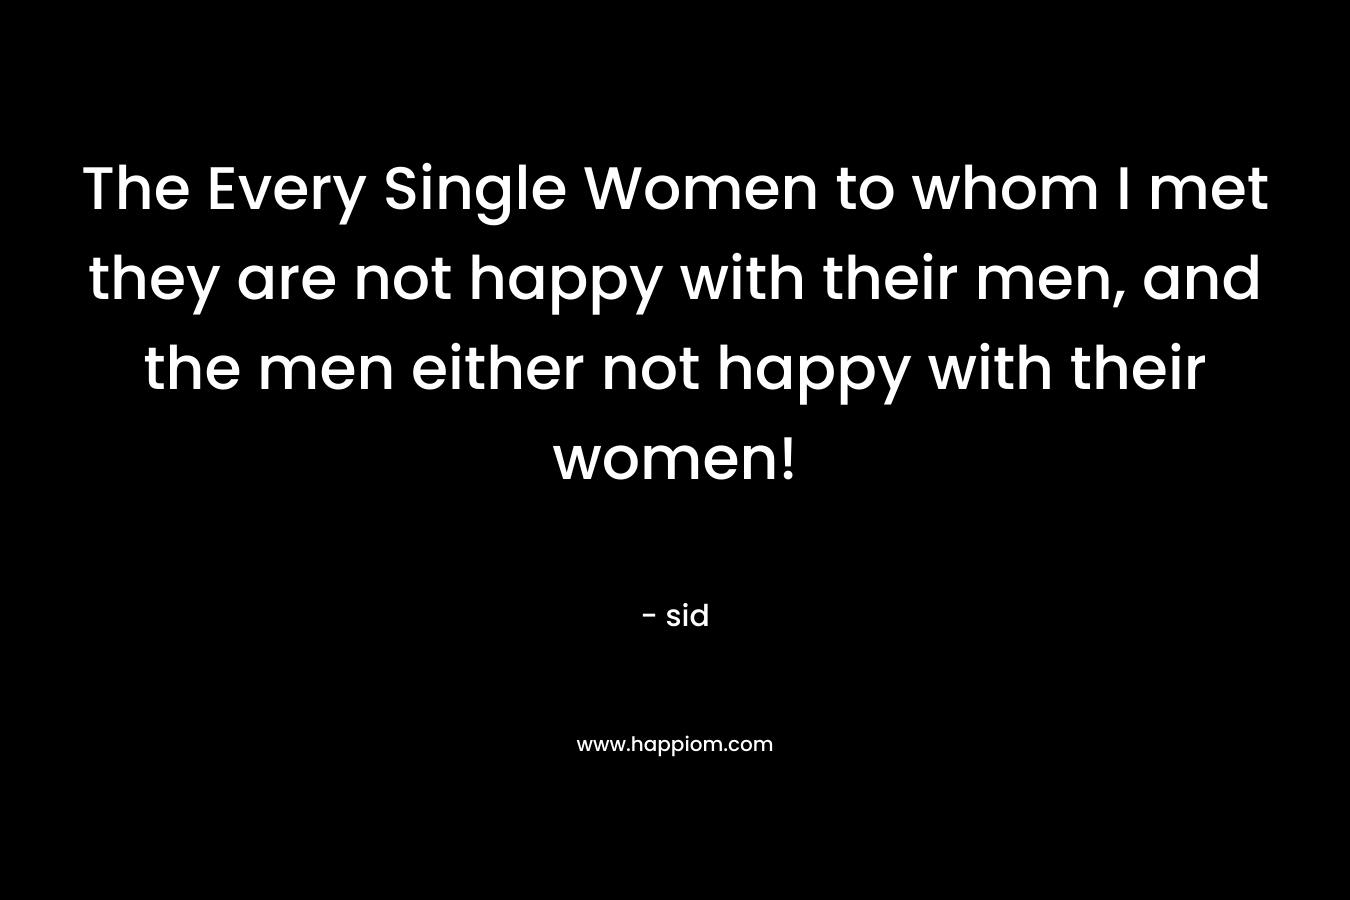 The Every Single Women to whom I met they are not happy with their men, and the men either not happy with their women!